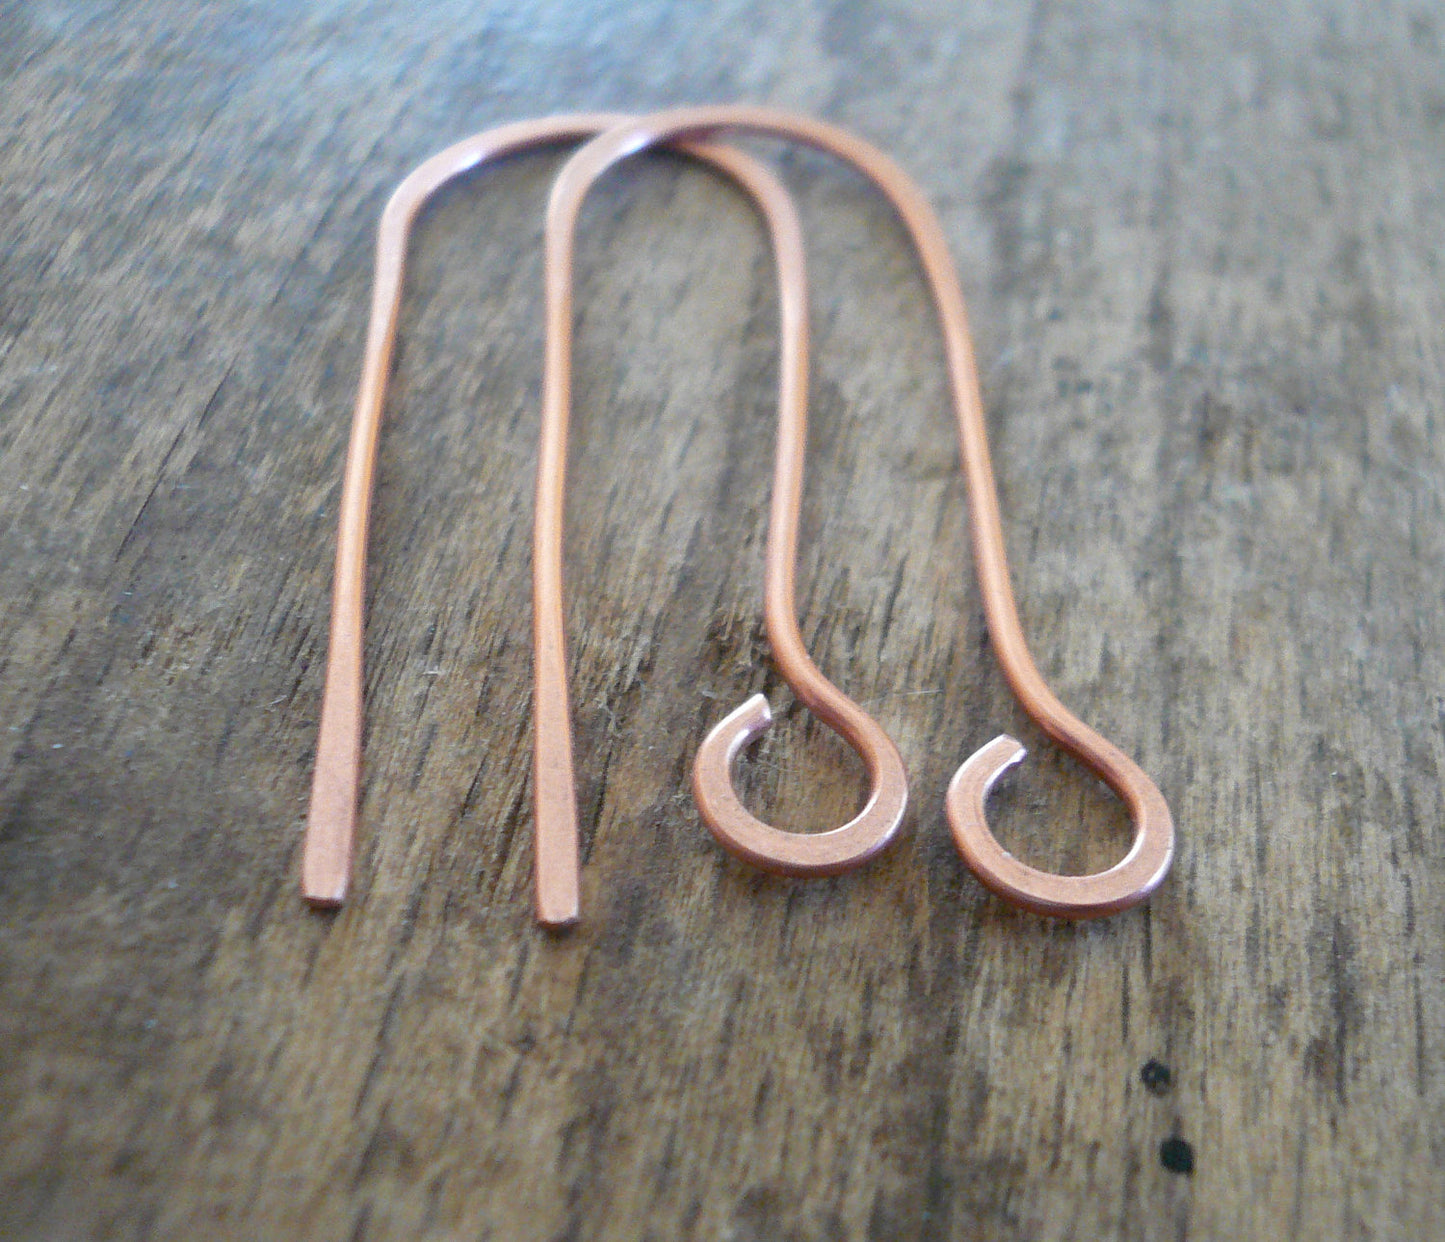 Minimalist Antiqued Copper Earwires - Handmade. Handforged. Made to Order